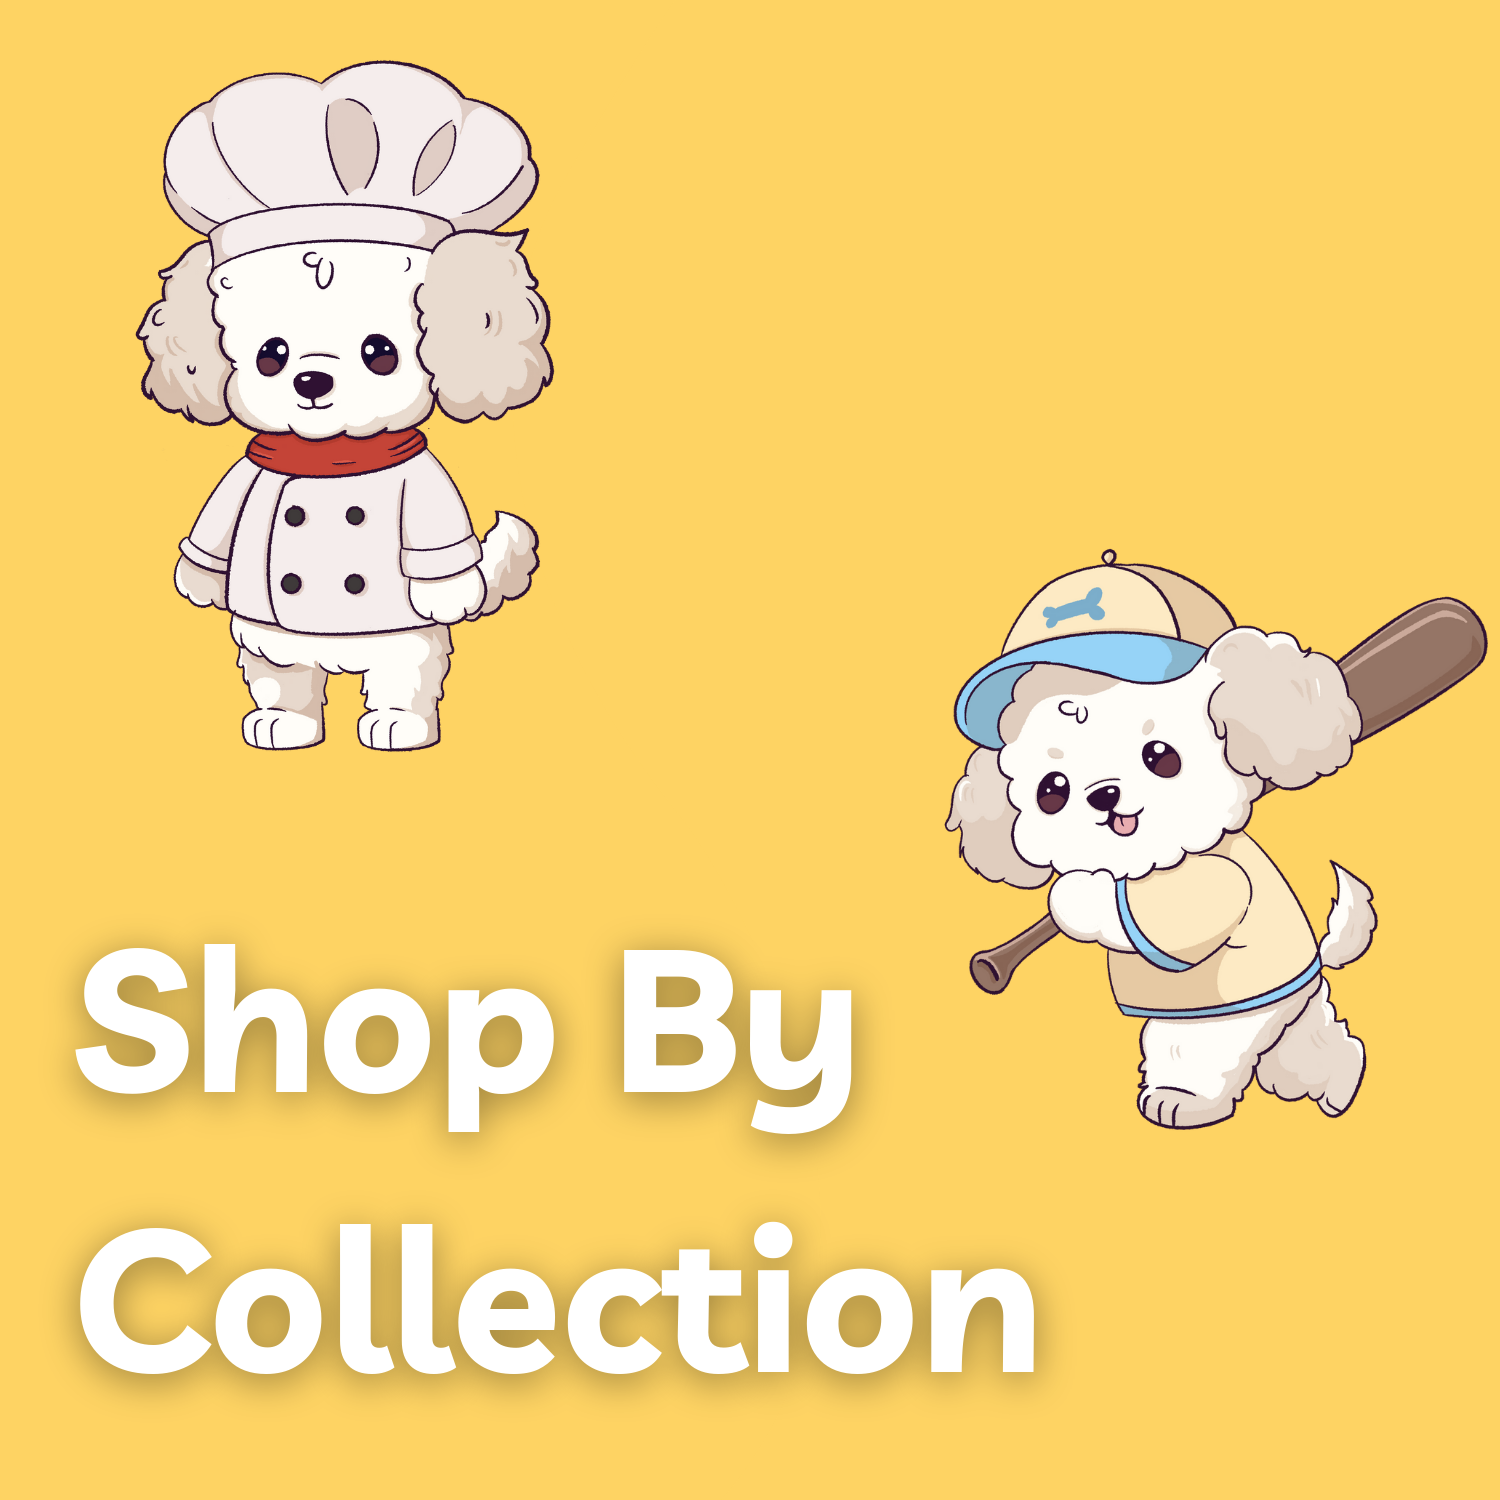 Shop By Collection Stickers Collection Image on Yellow Background with Stickers